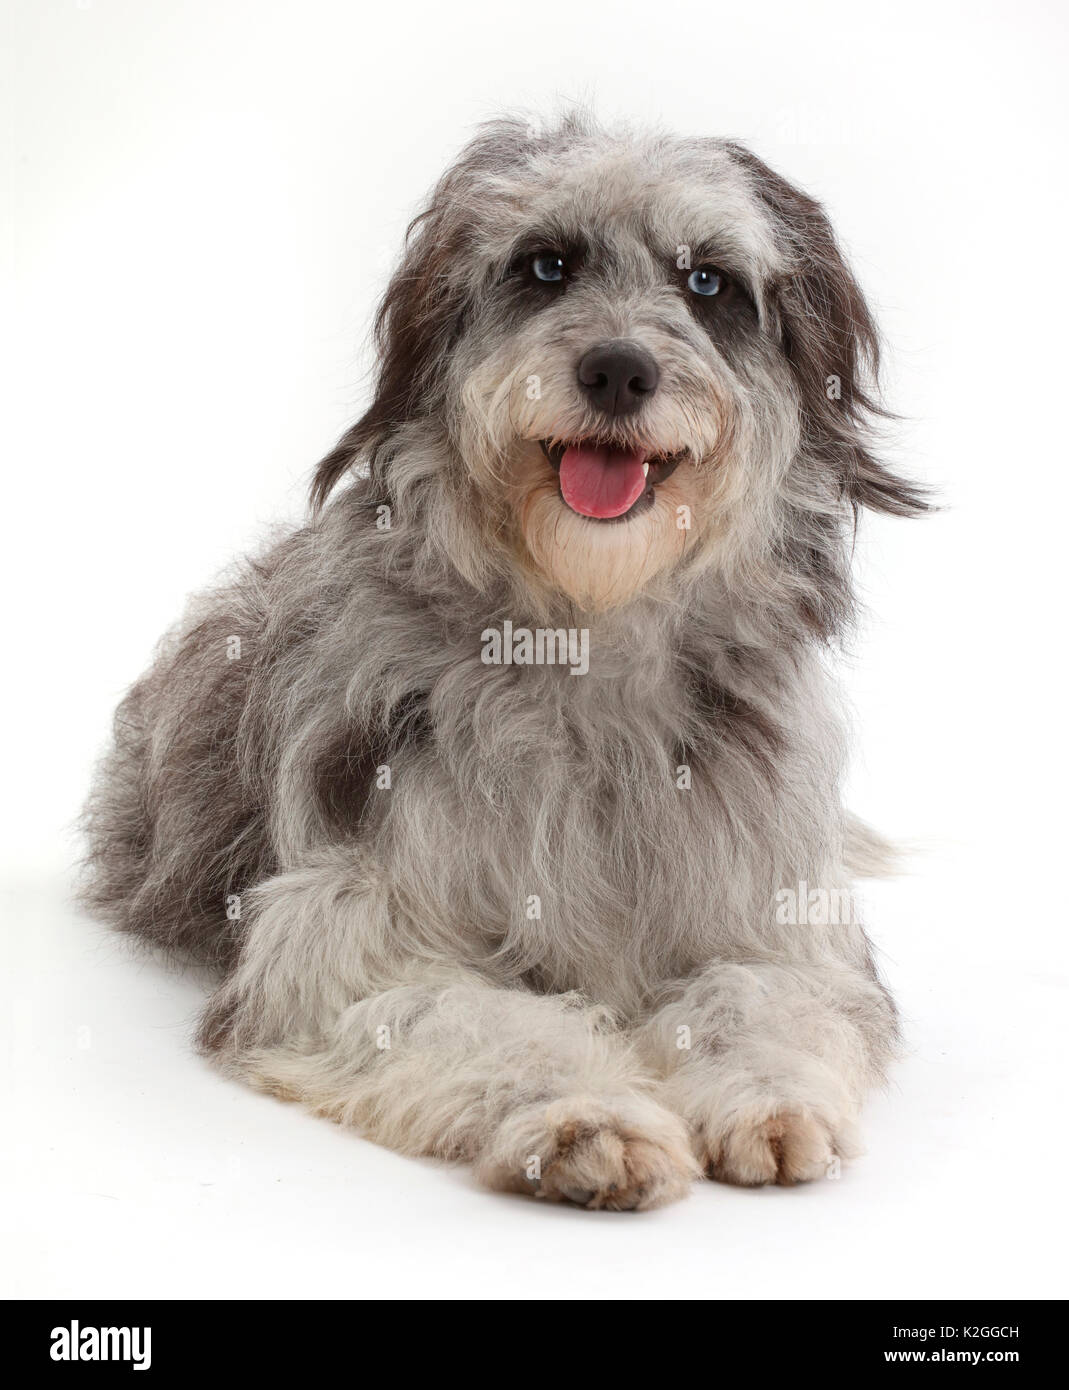 Grey shaggy Cadoodle mutt. Stock Photo